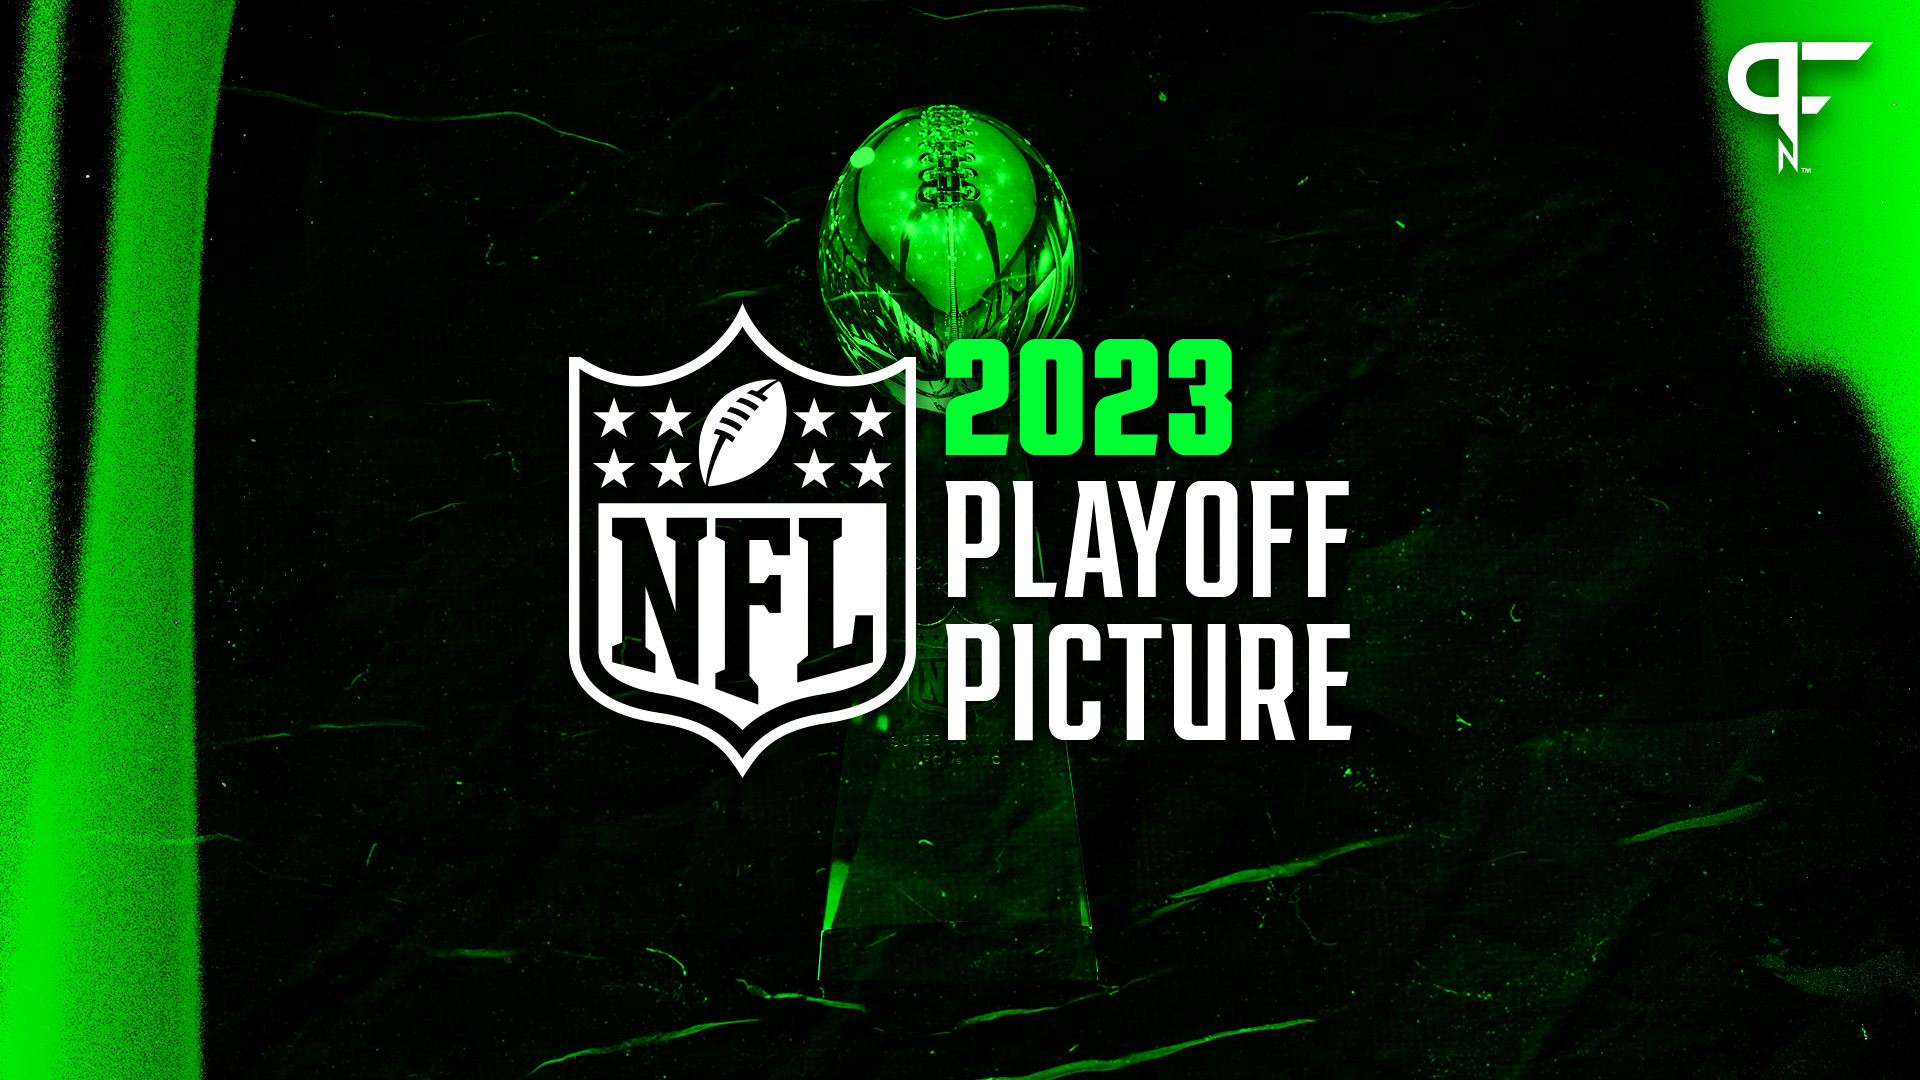 Lombardi trophy covered by the words 2023 playoff picture and the NFL logo